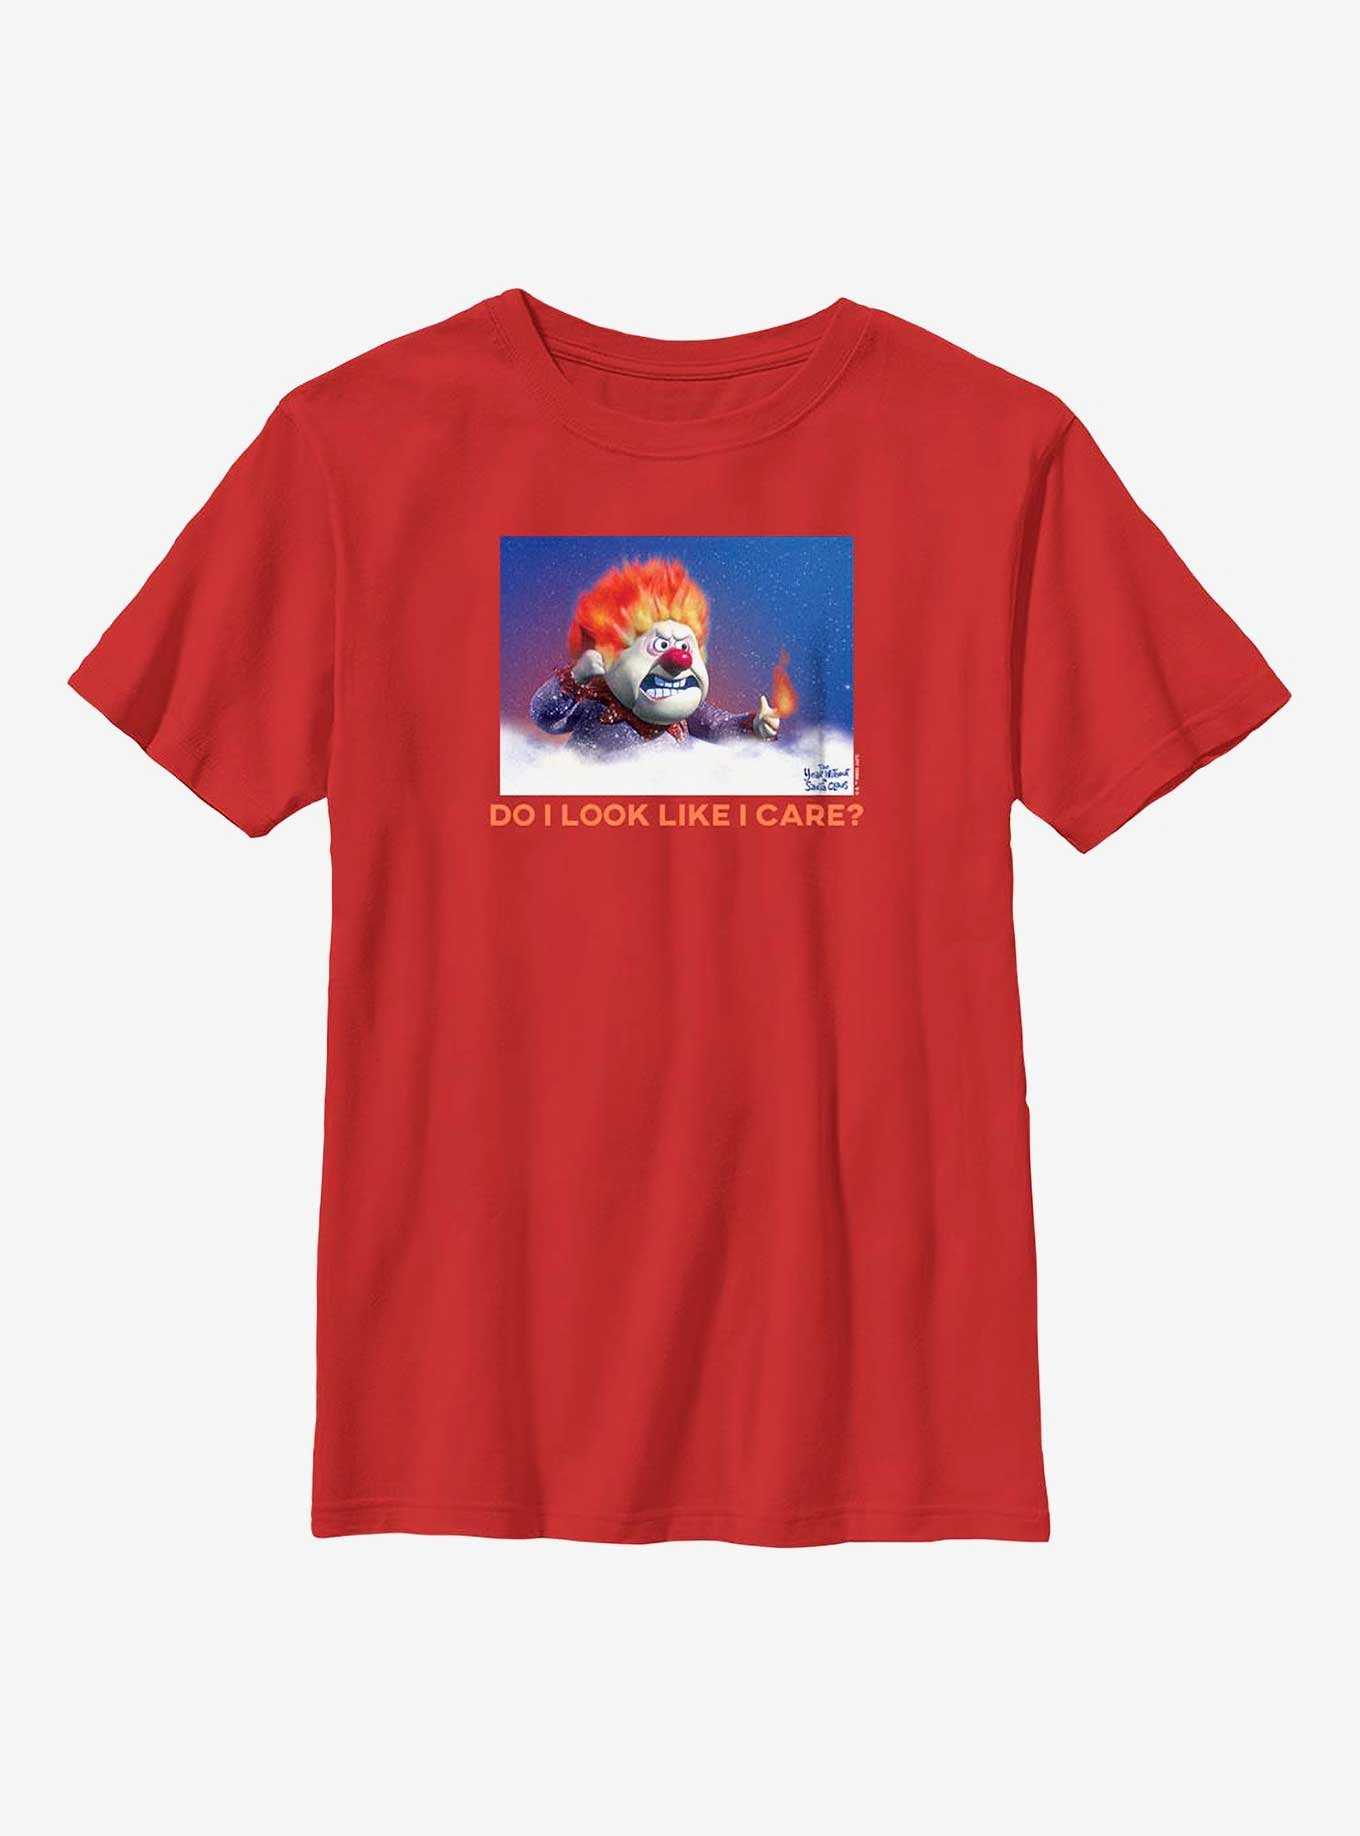 The Year Without Santa Claus Heat Miser Care? Youth T-Shirt, , hi-res